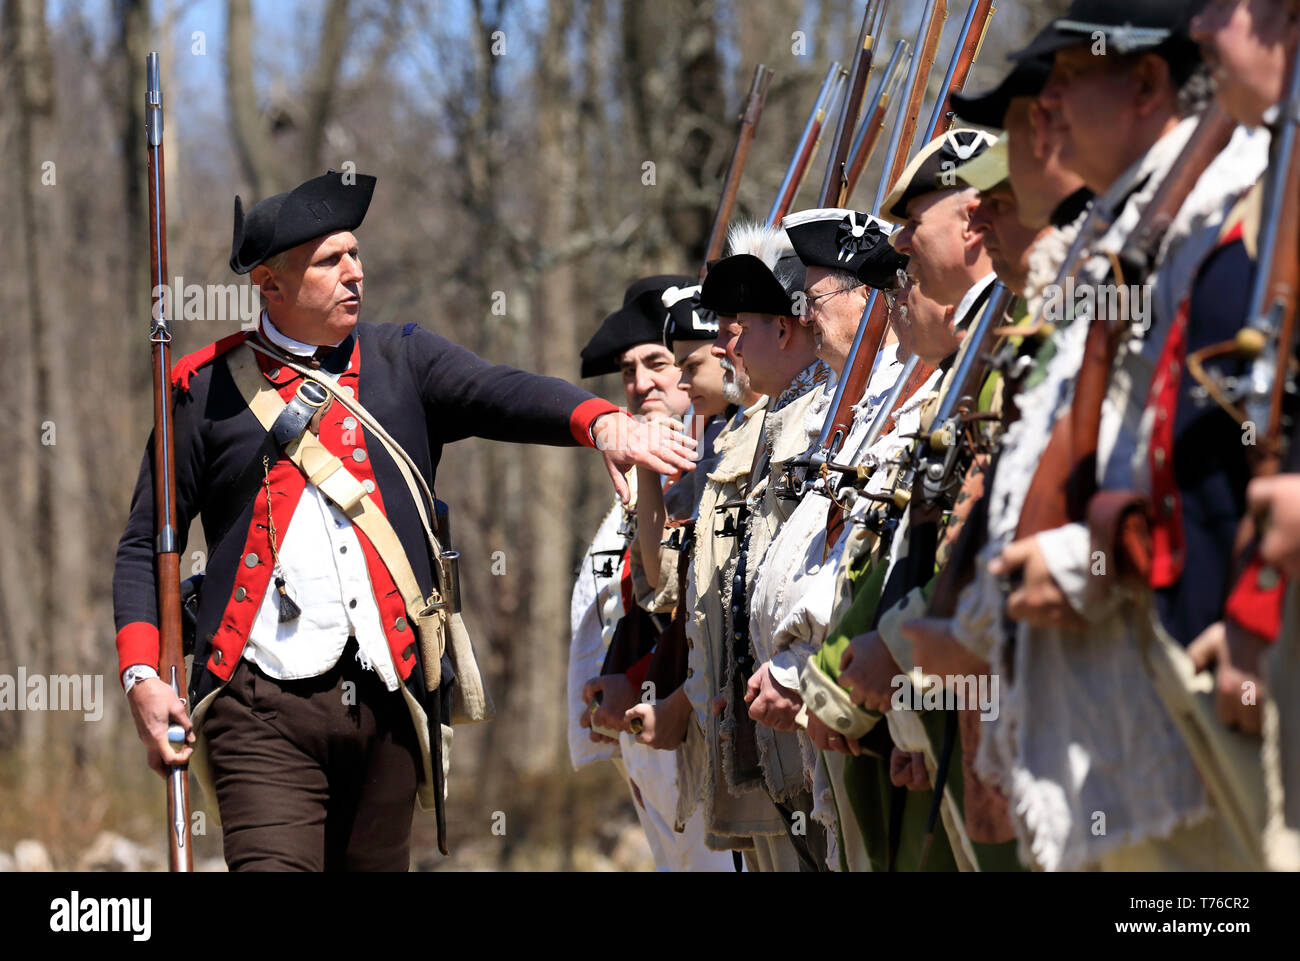 Reenactors of American Continental Army soldiers and an officer in Jockey Hollow Historical Park during annual Jockey Hollow Encampment.New Jersey.USA Stock Photo